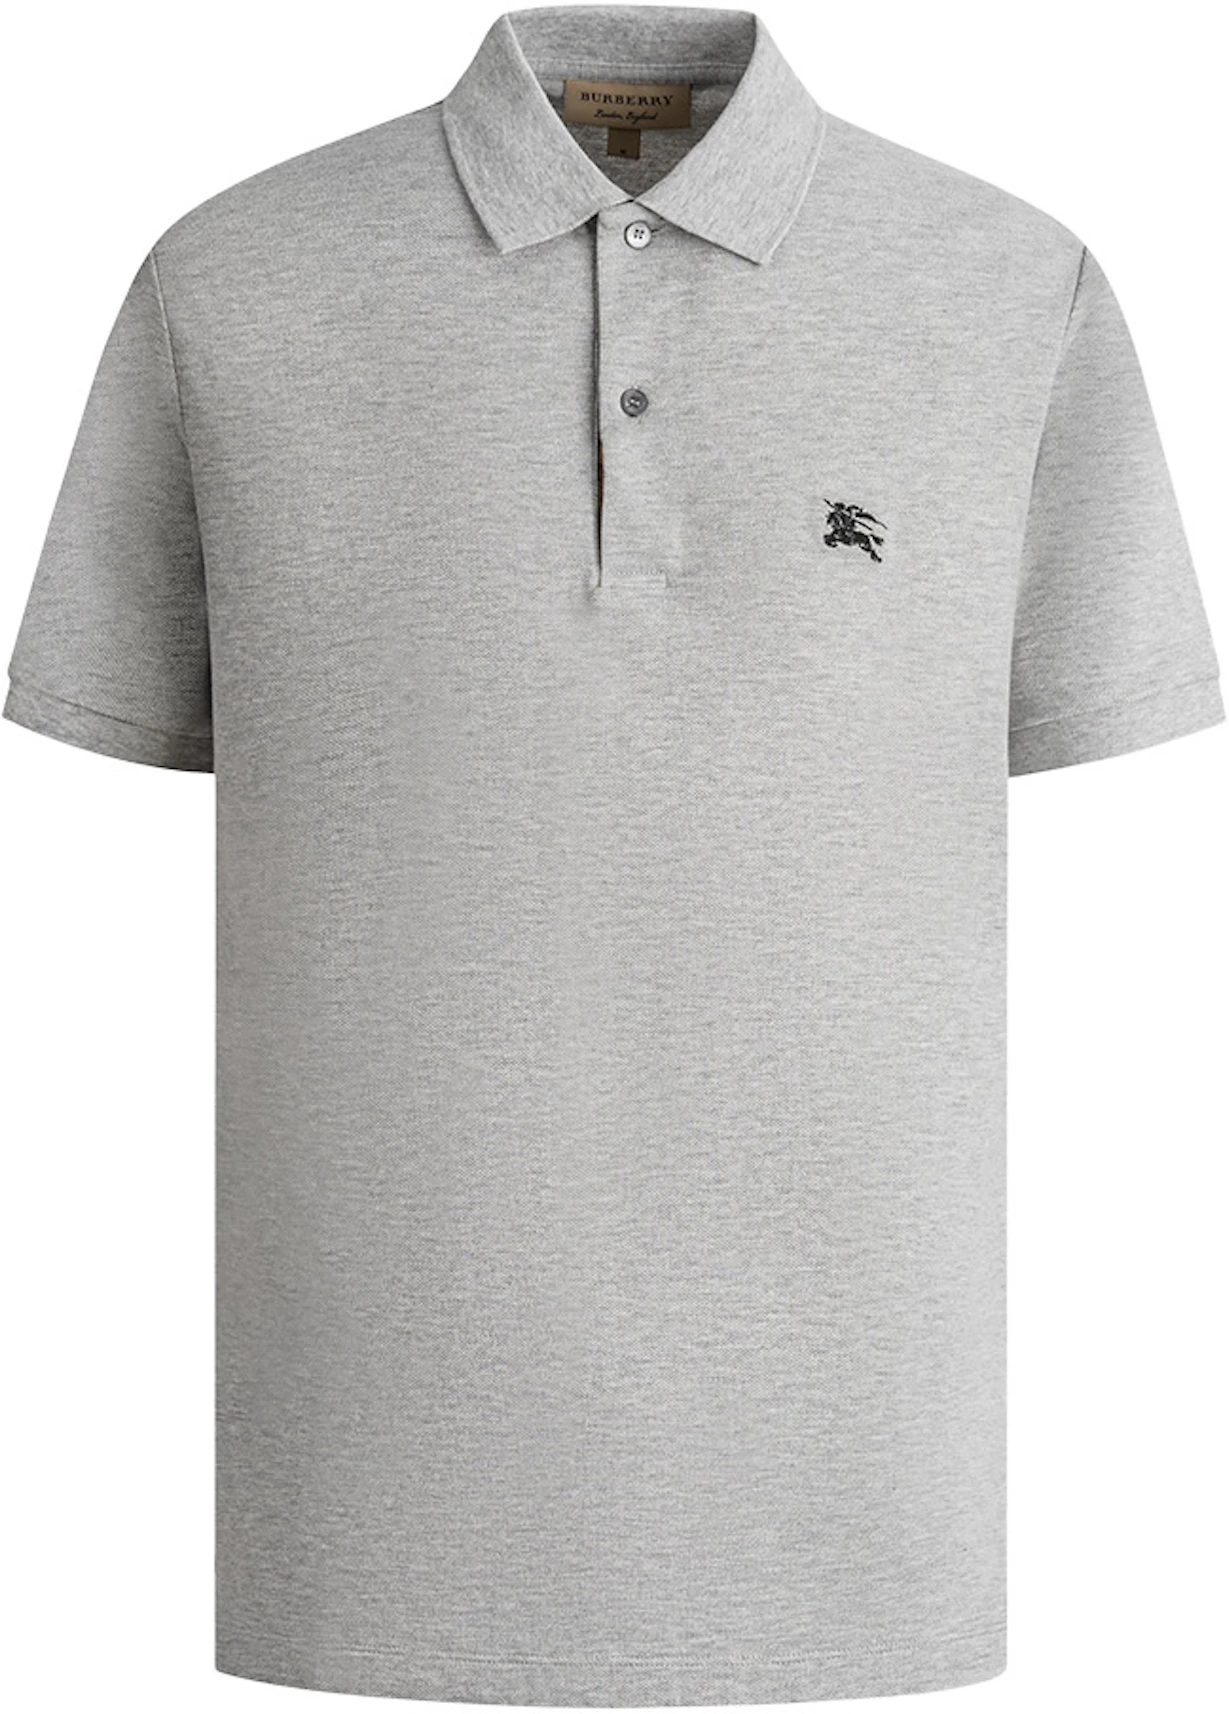 Burberry Oxford Logo Embroidered Polo Grey/Black - US